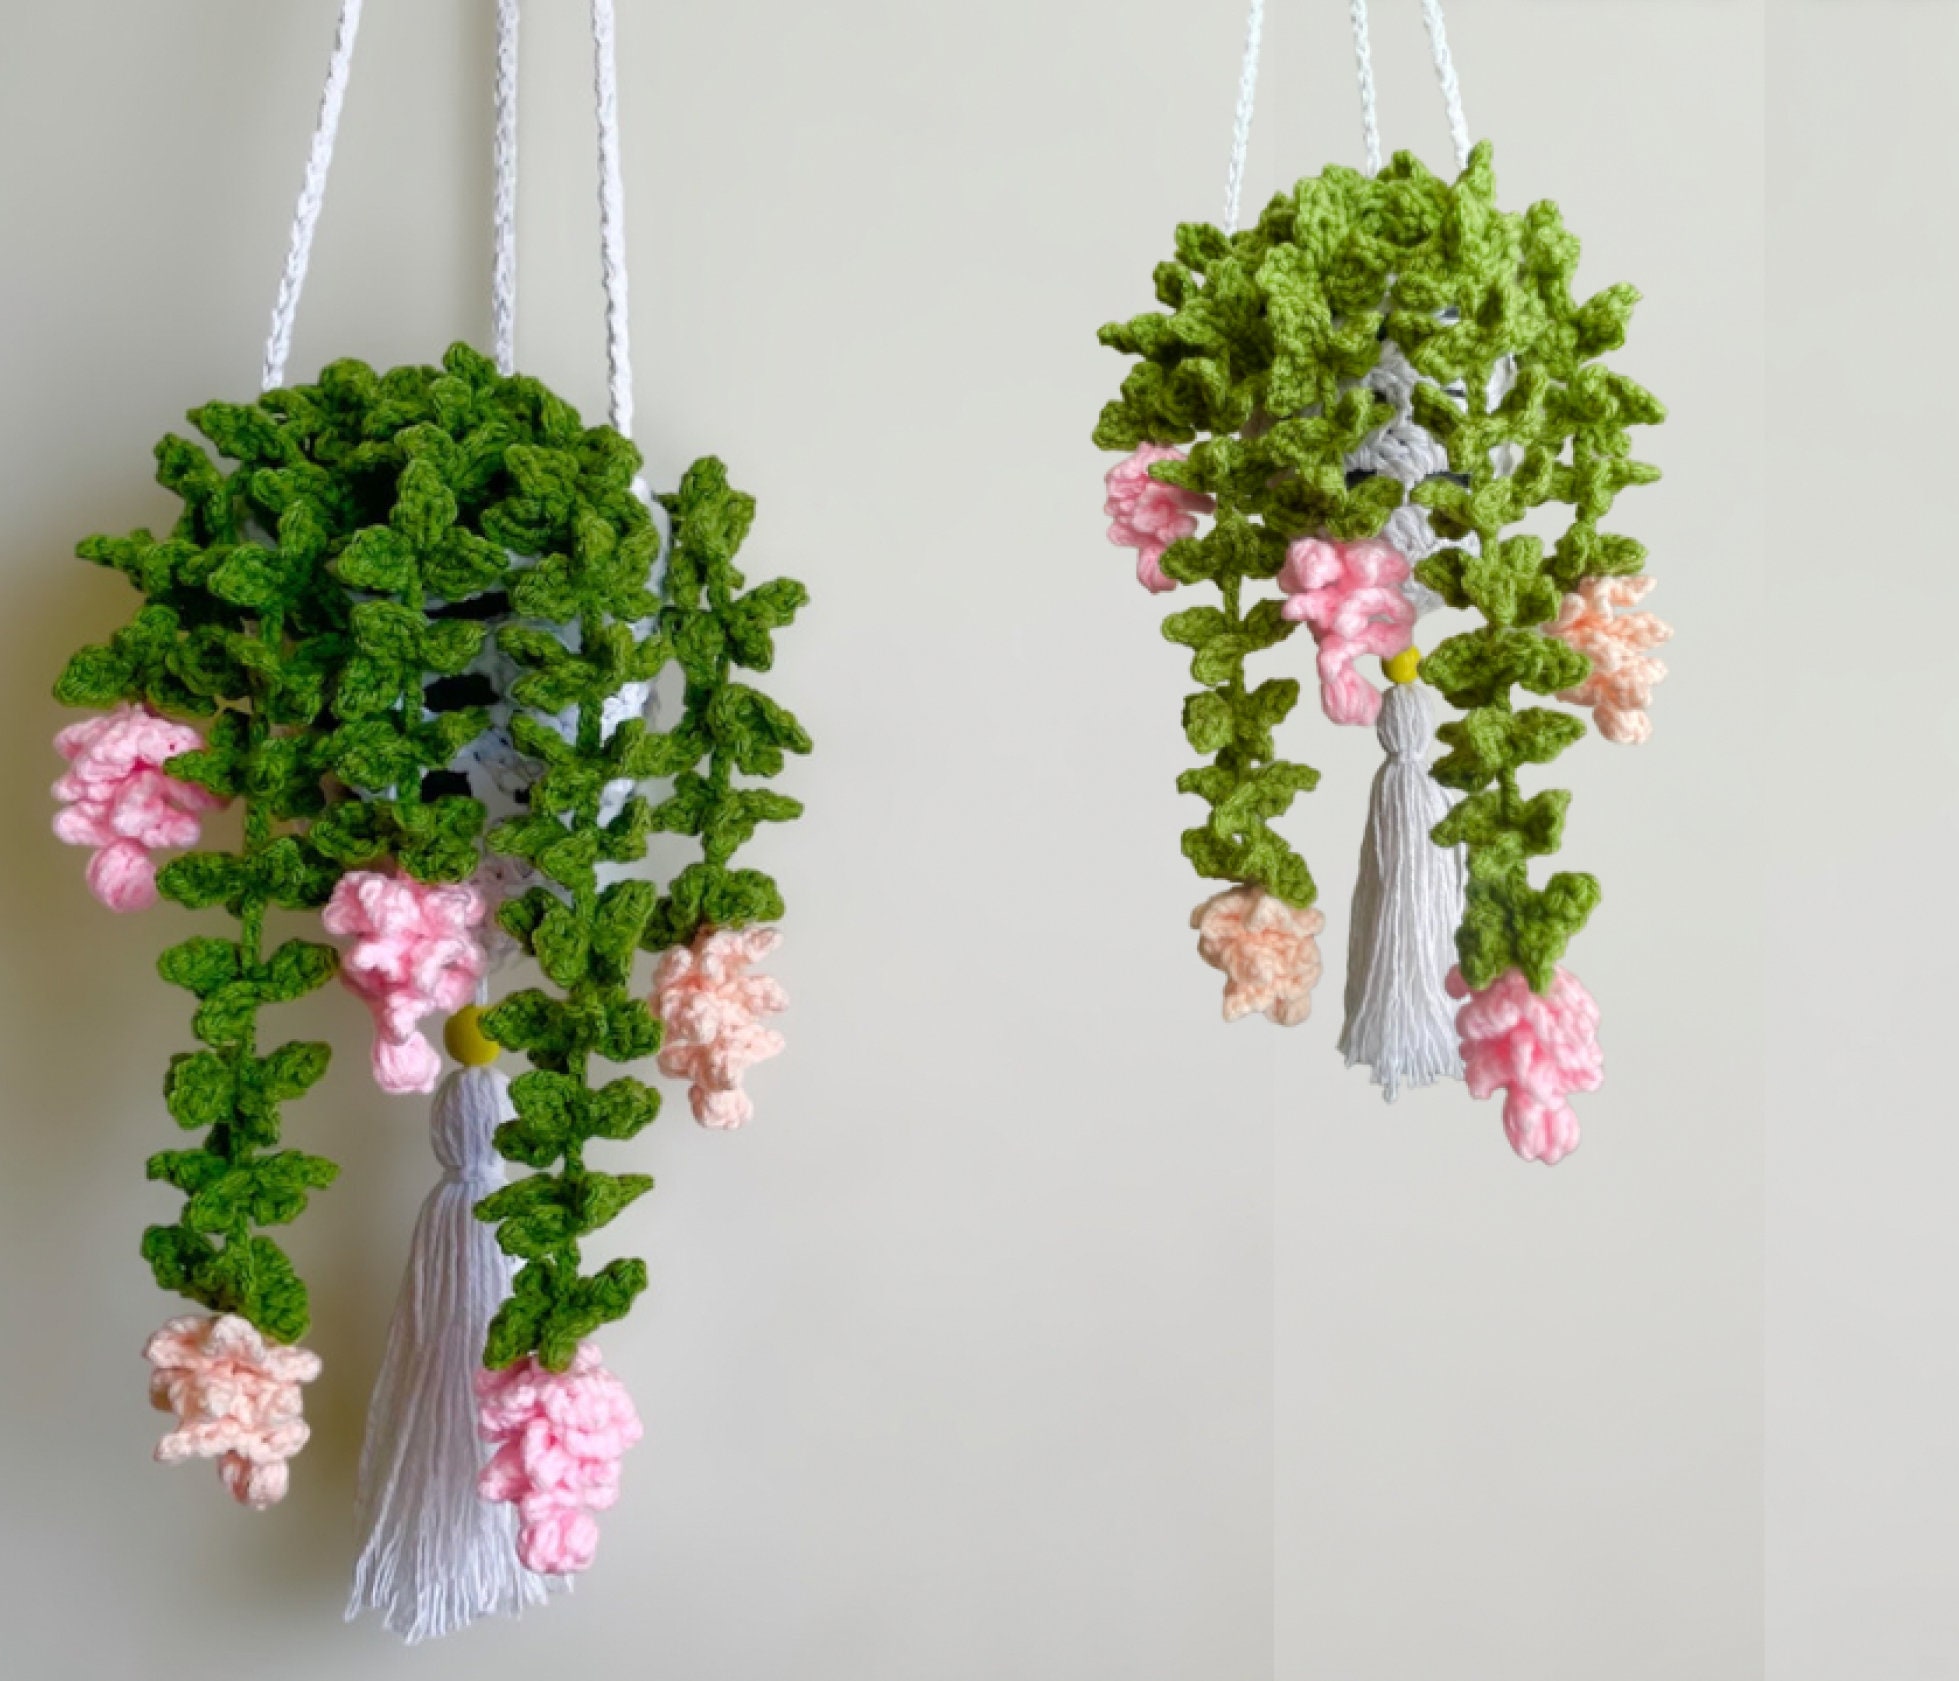 4pcs Artificial Vines Hanging Fake Plants, Artificial Vine Making Fake  Hanging Plants, Artificial Ferns Wall Plants Fake Ivy Green Garland Room  Decoration Home Garden Wedding Party Indoor Outdoor Decor, Farmhouse  Aesthetic Artificial